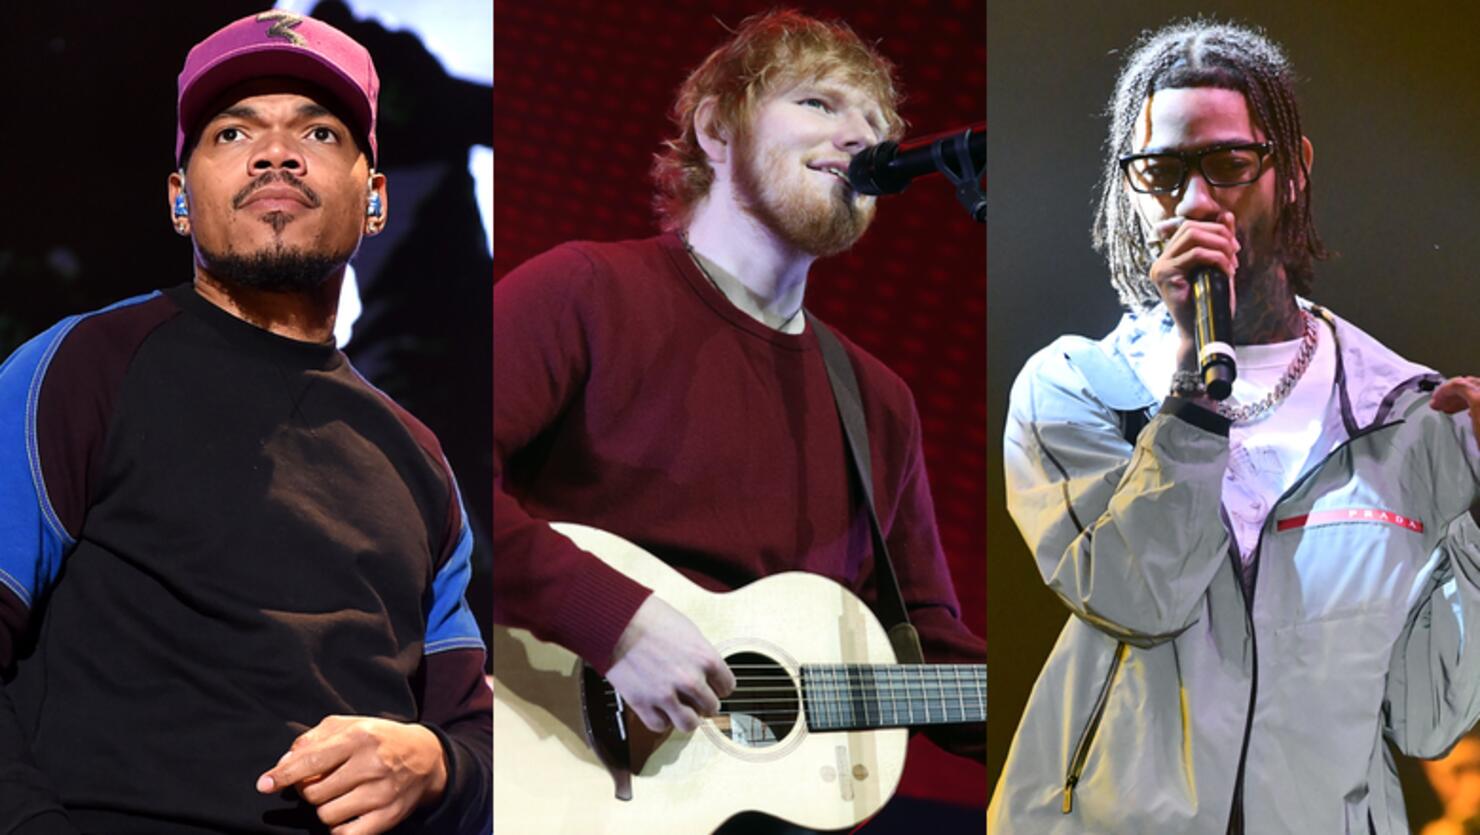 Ed Sheeran's 'Cross Me' Video With Chance the Rapper & PnB Rock